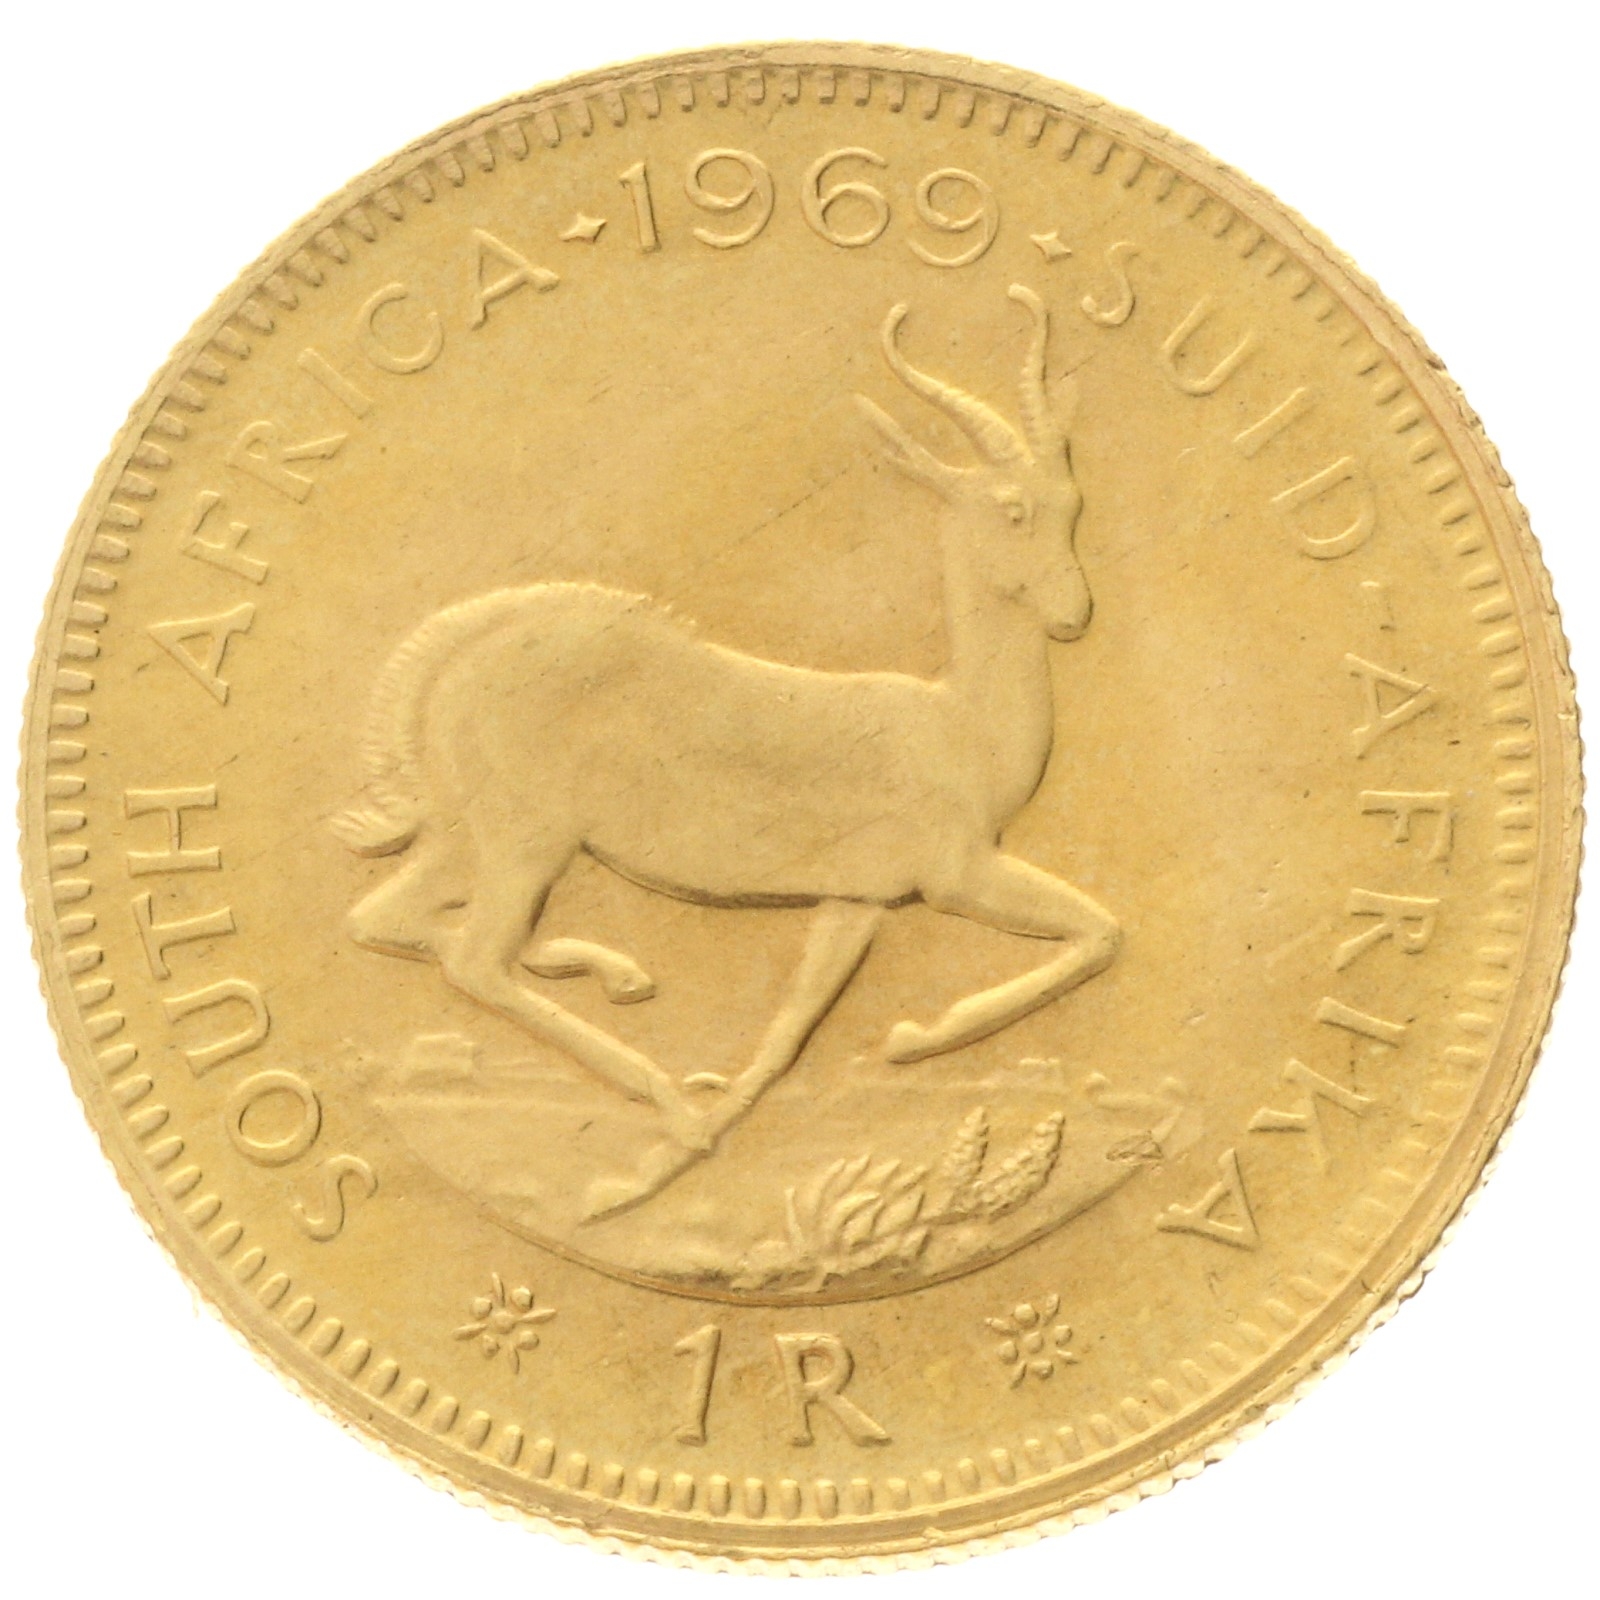 South Africa - 1 rand - 1969